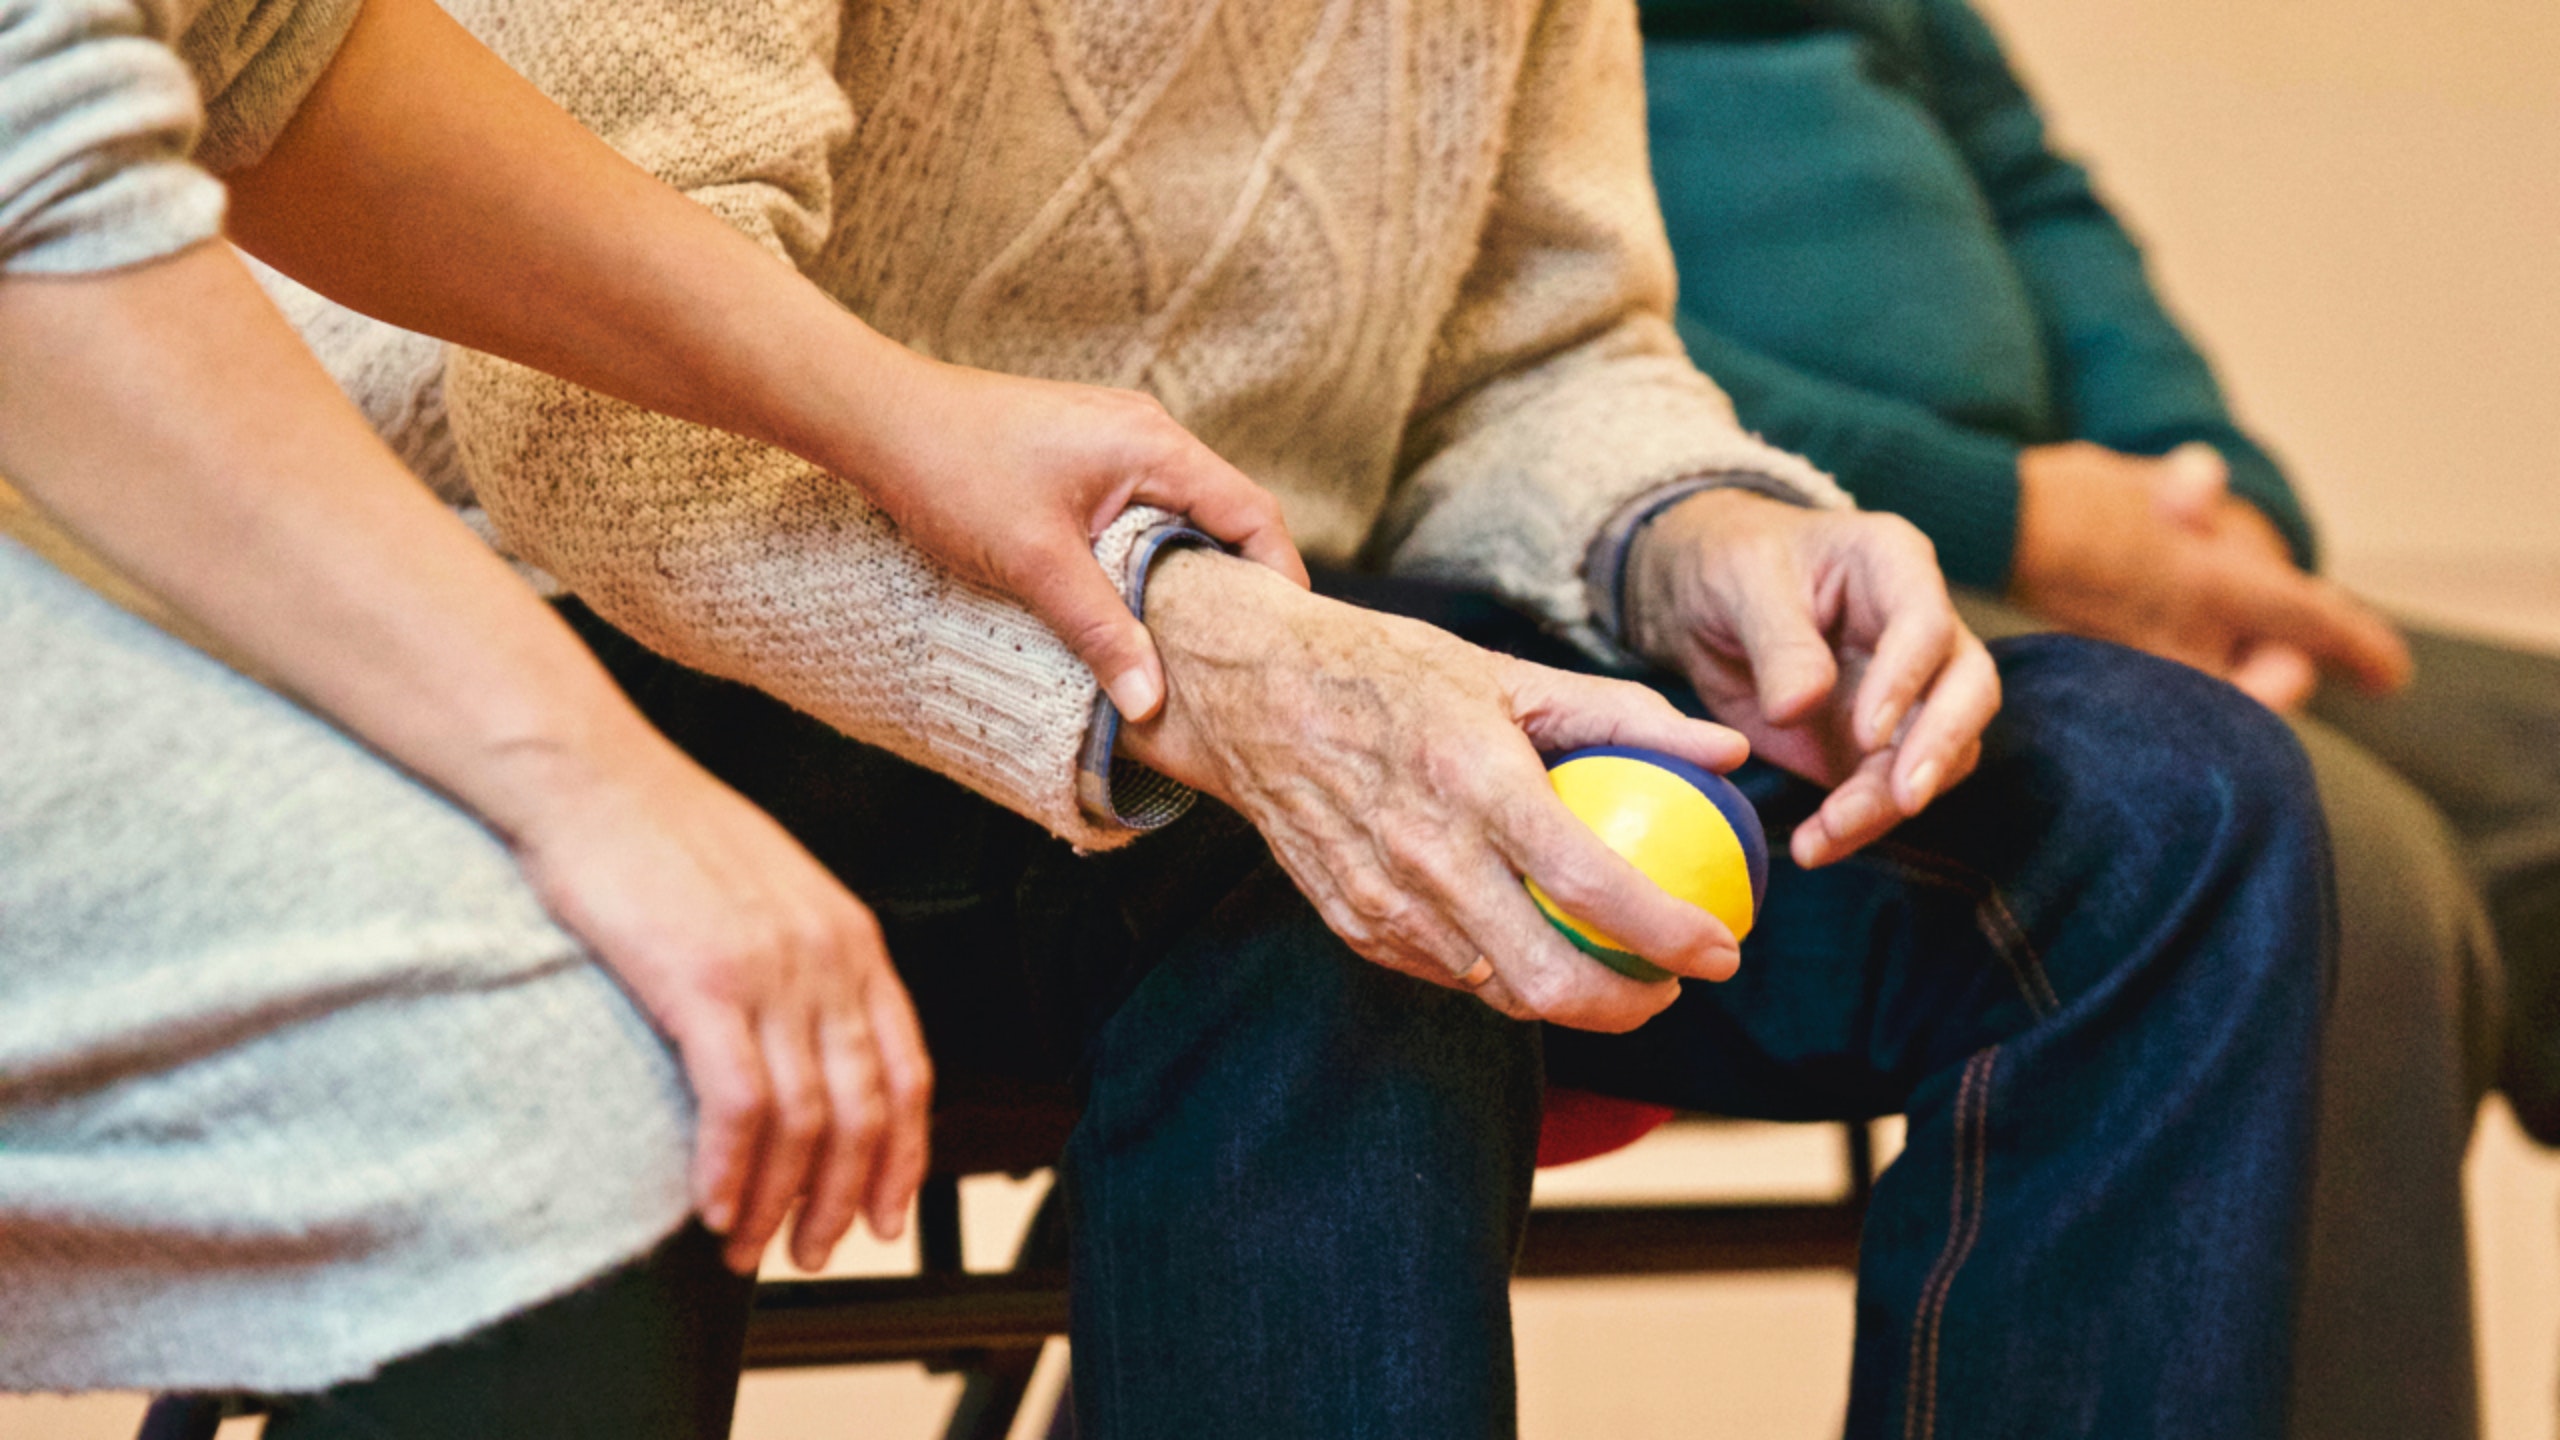 Carers Rights Day helps direct unpaid carers to support. Image: Matthias Zomer / Pexels